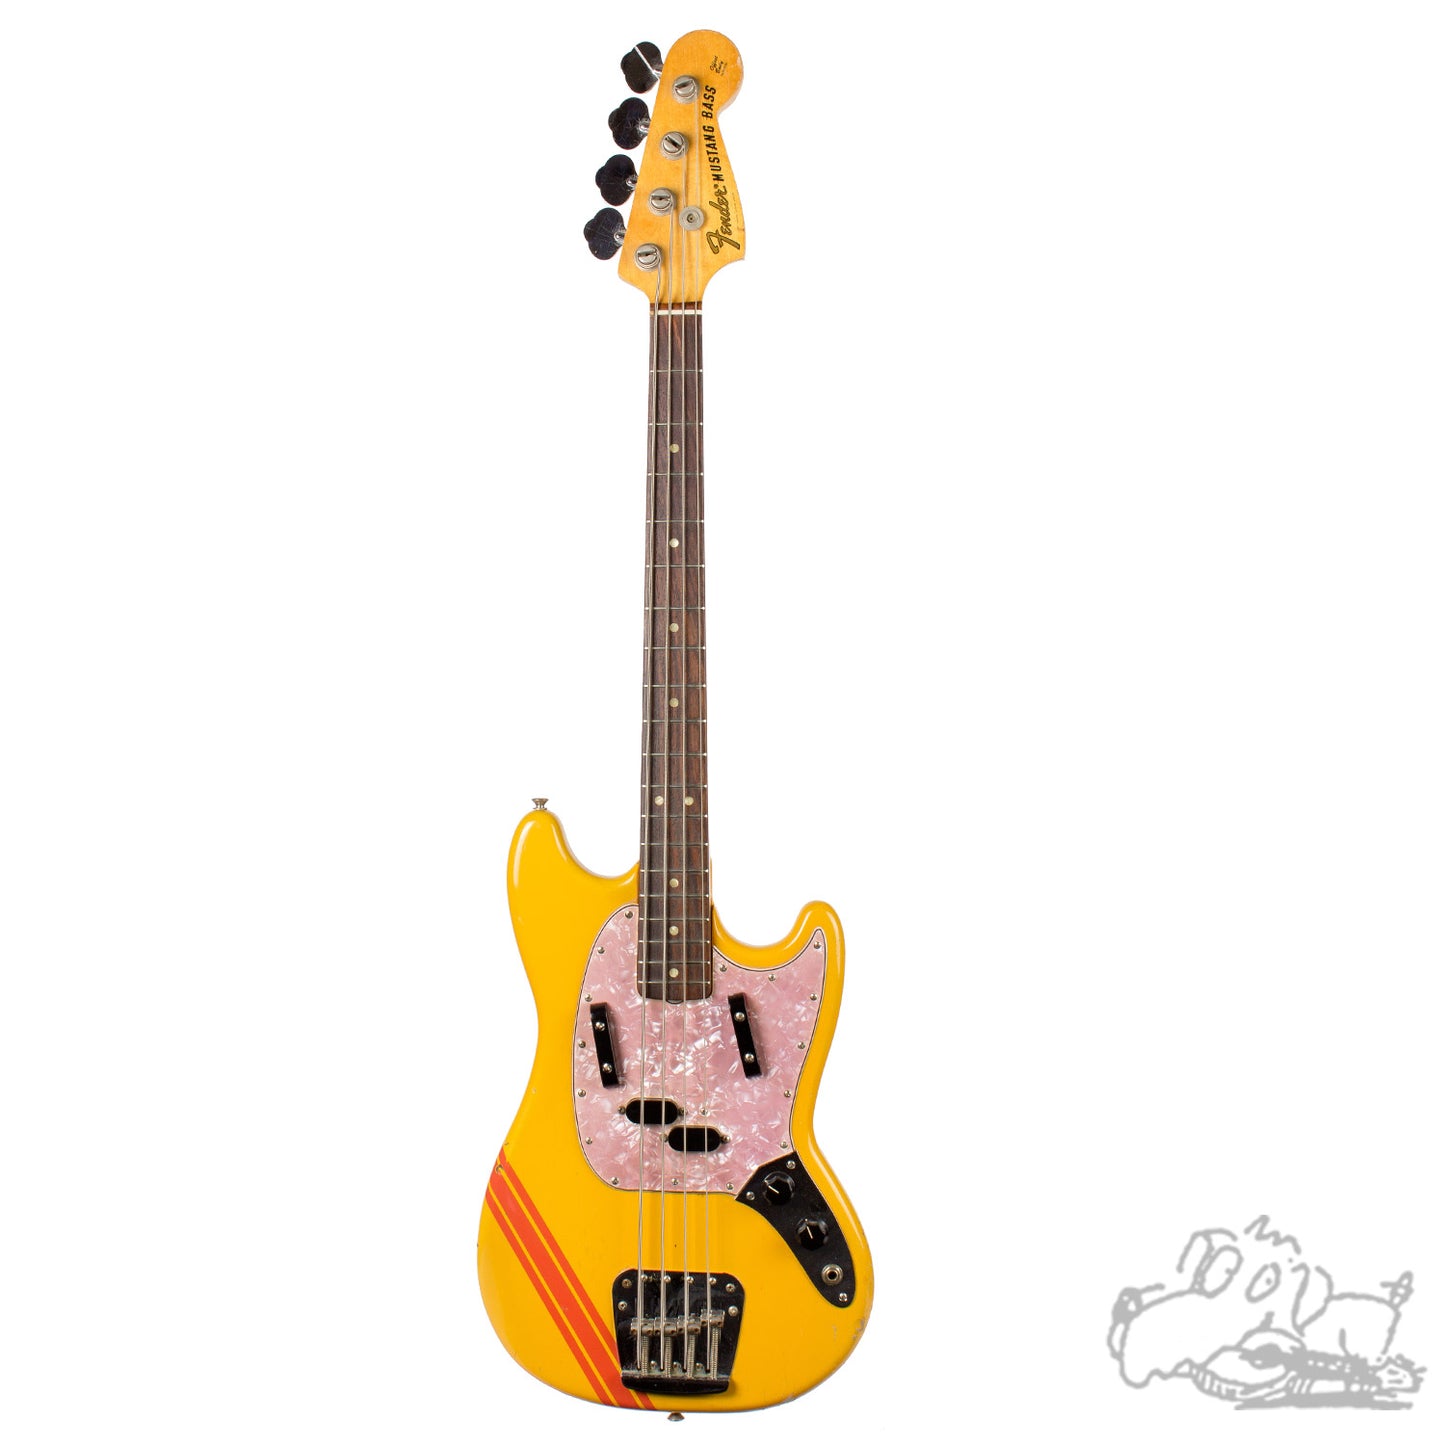 1971 Fender Competition Orange Mustang Bass w/ Rose Pickguard